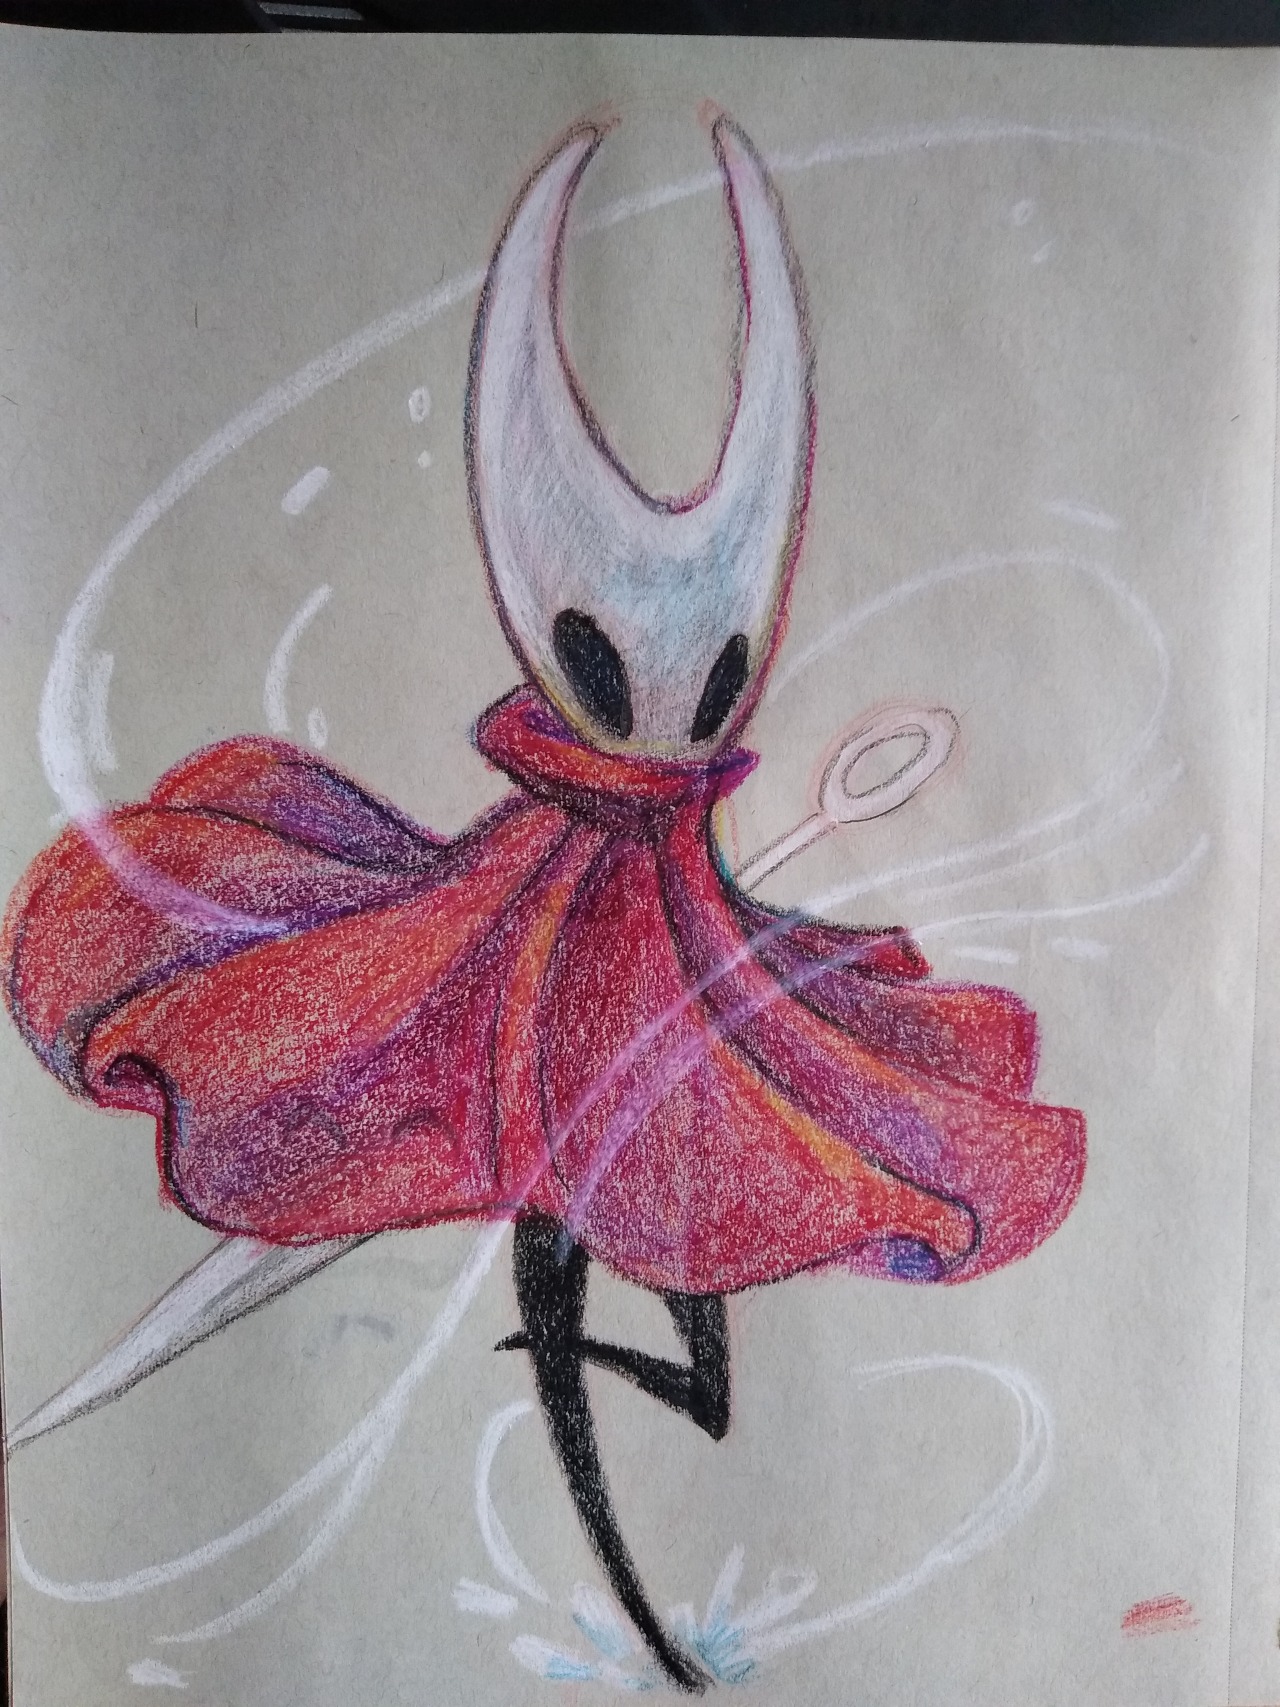 Just some sketchbook doodles I did over the past few weeks #hollow knight #tanz der vampire  #alfred tanz der vampire #my art #theres some alfreds here so I tagged them  #the hornet was drawn with crayons lol  #the other mediums are just coloring pencils and some markers #nothing fancy